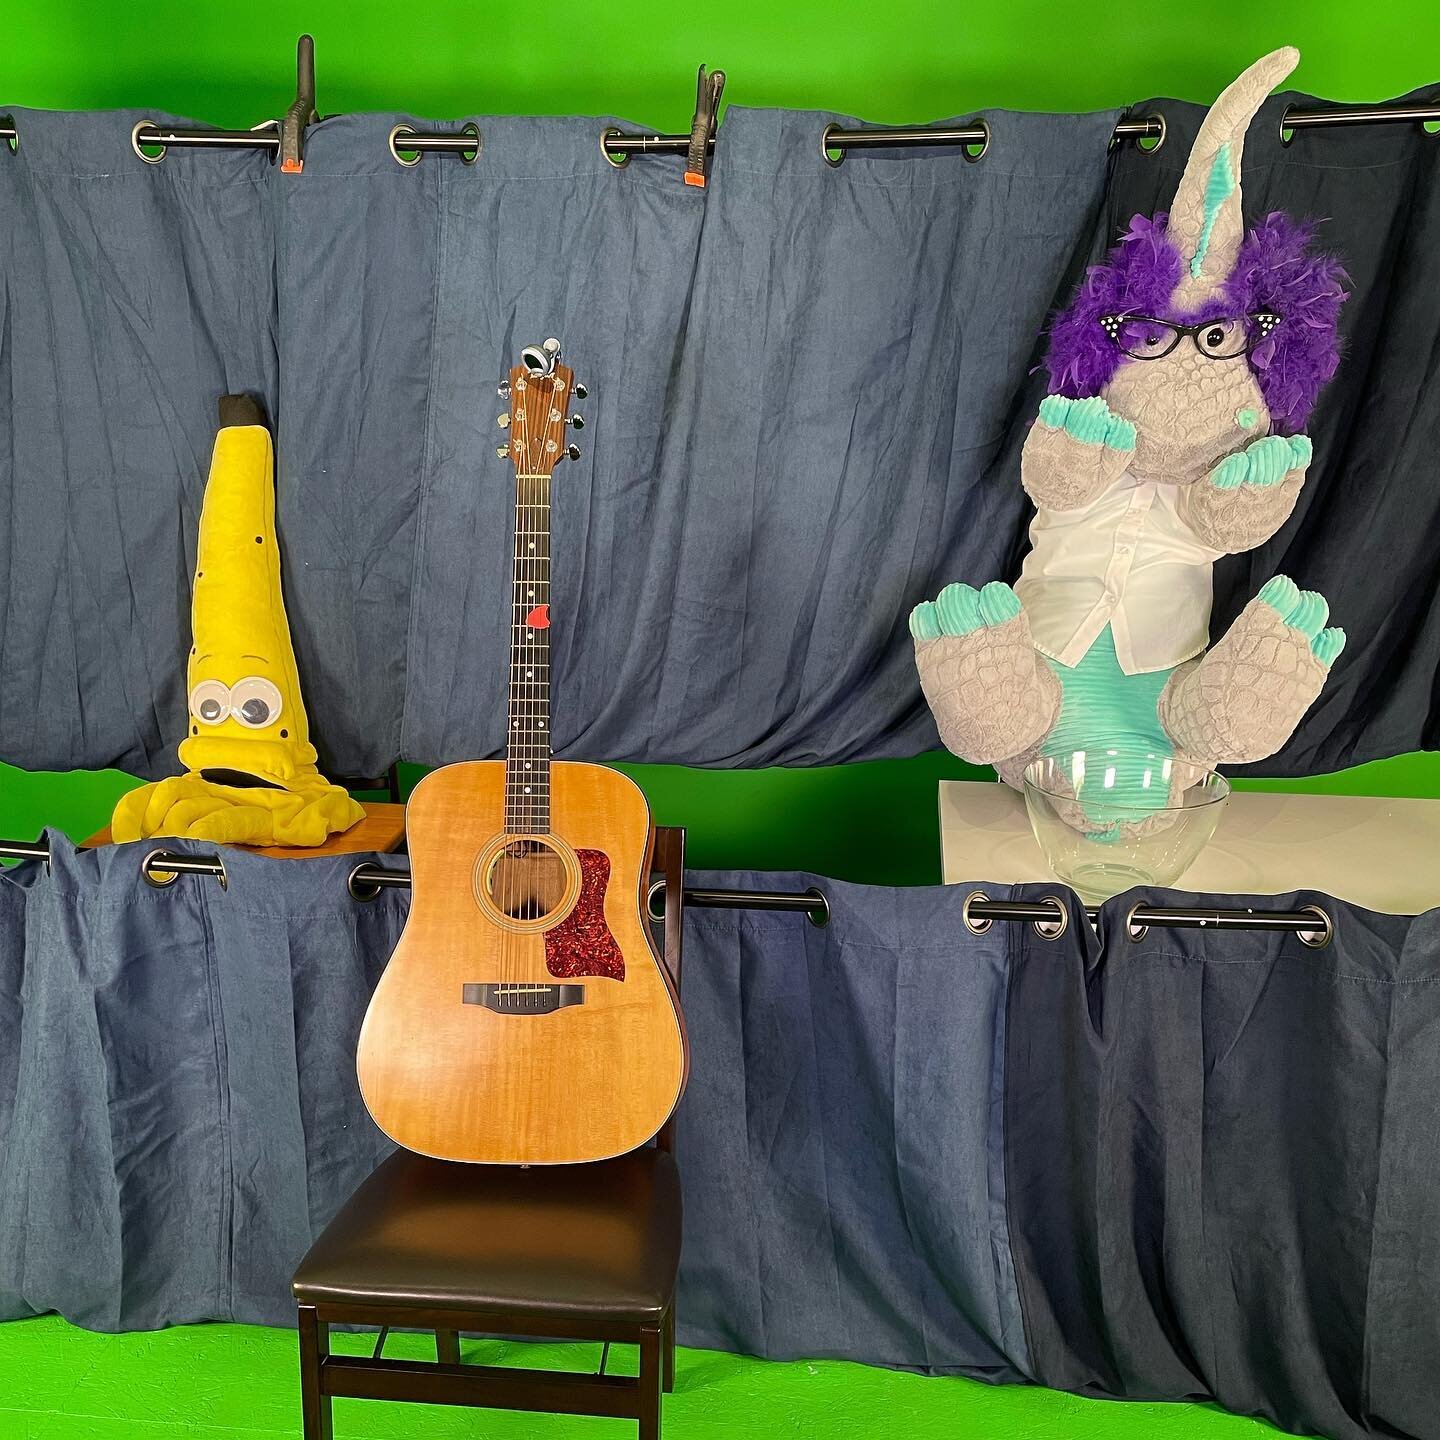 Giant Banana and Ridonculous The Ridiculous are ready for their performance. #puppetshow